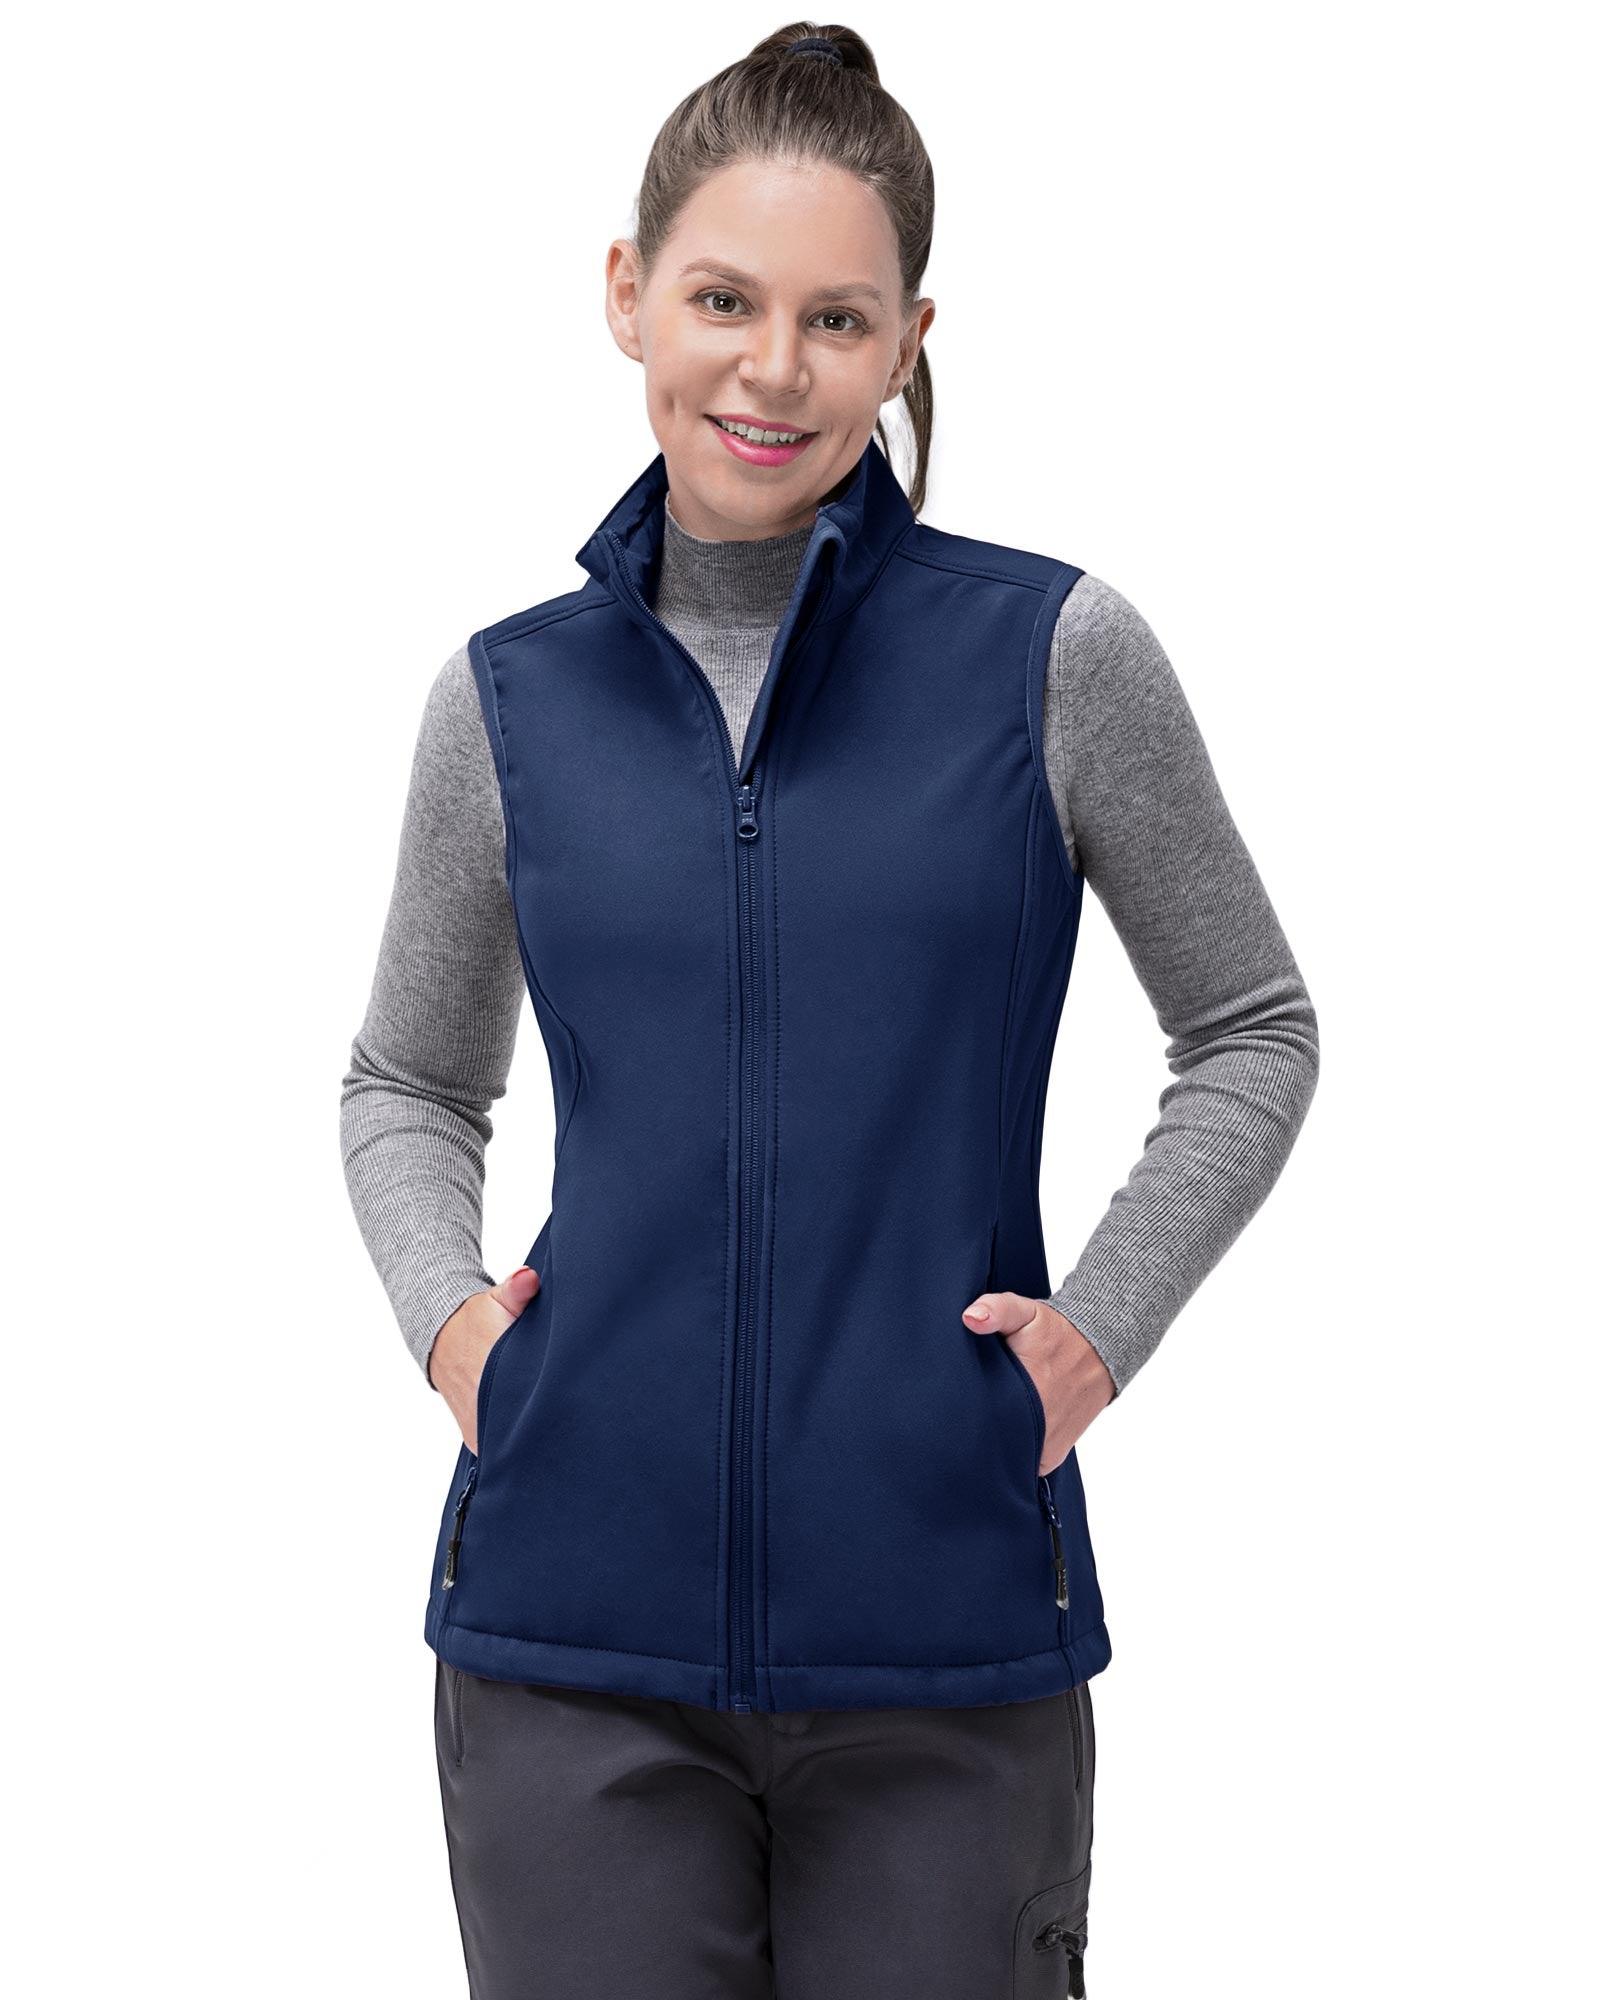 33,000ft Women's Lightweight Running Vest Outerwear with Pockets, Windproof  Sleeveless Jacket for Golf Hiking Travel